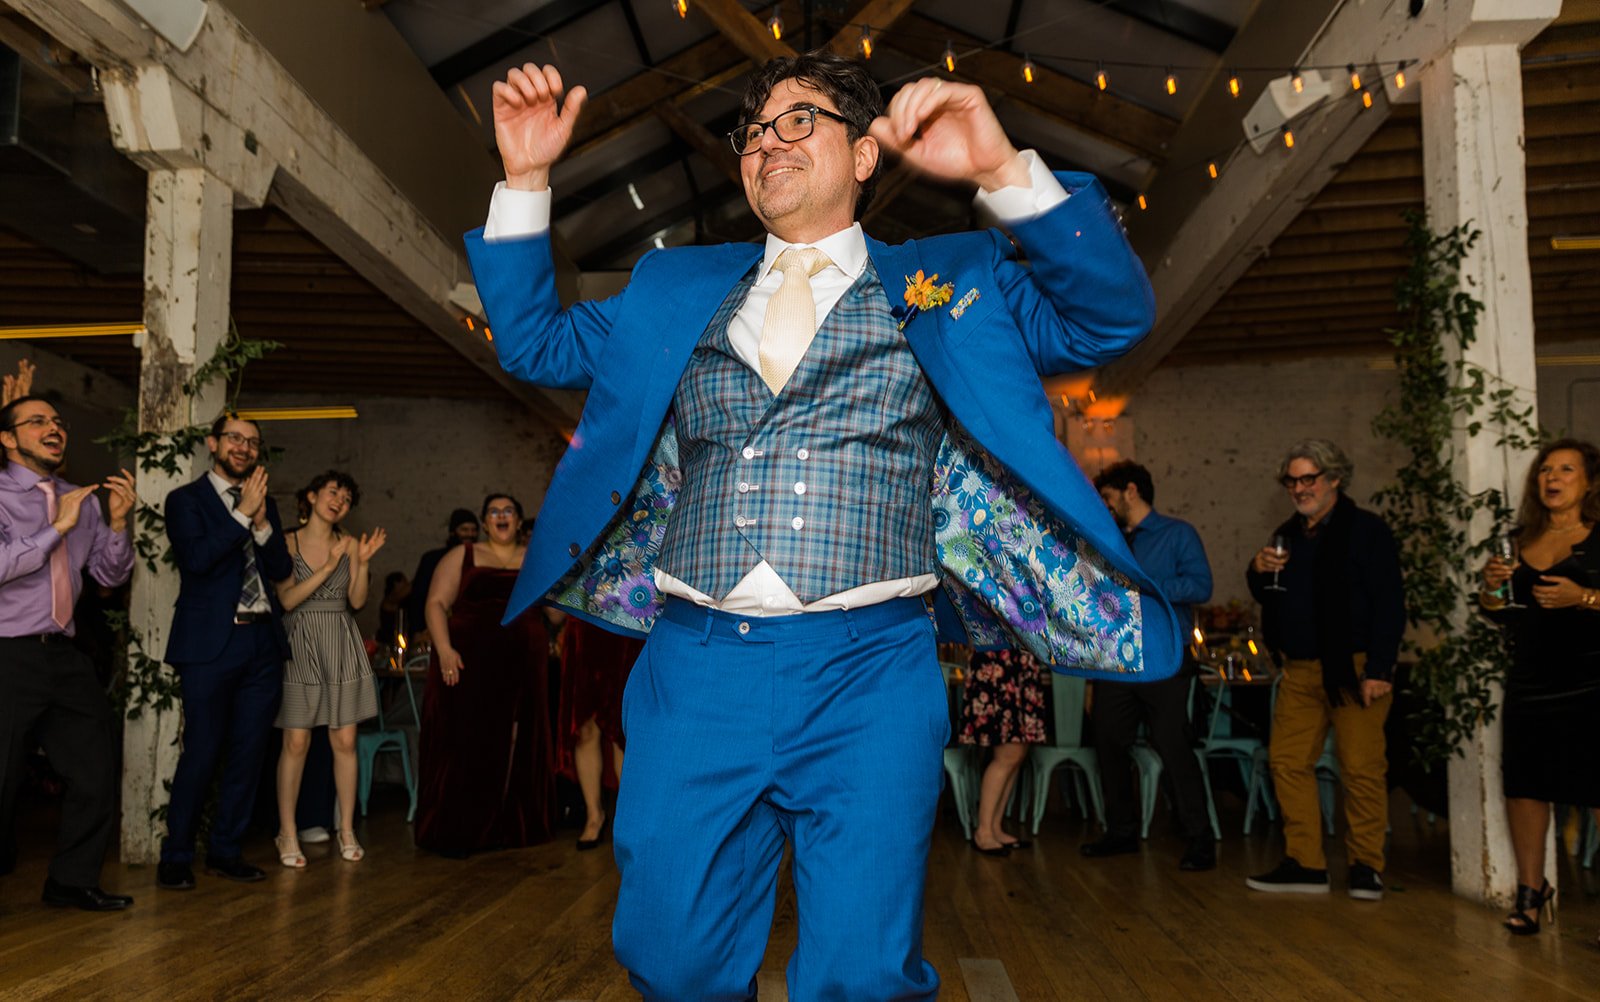  Documentary candid photo of groom dancing at nontraditional Jewish and Venezuelan wedding reception at The Joinery Chicago an Industrial loft wedding venue In Logan Square.  